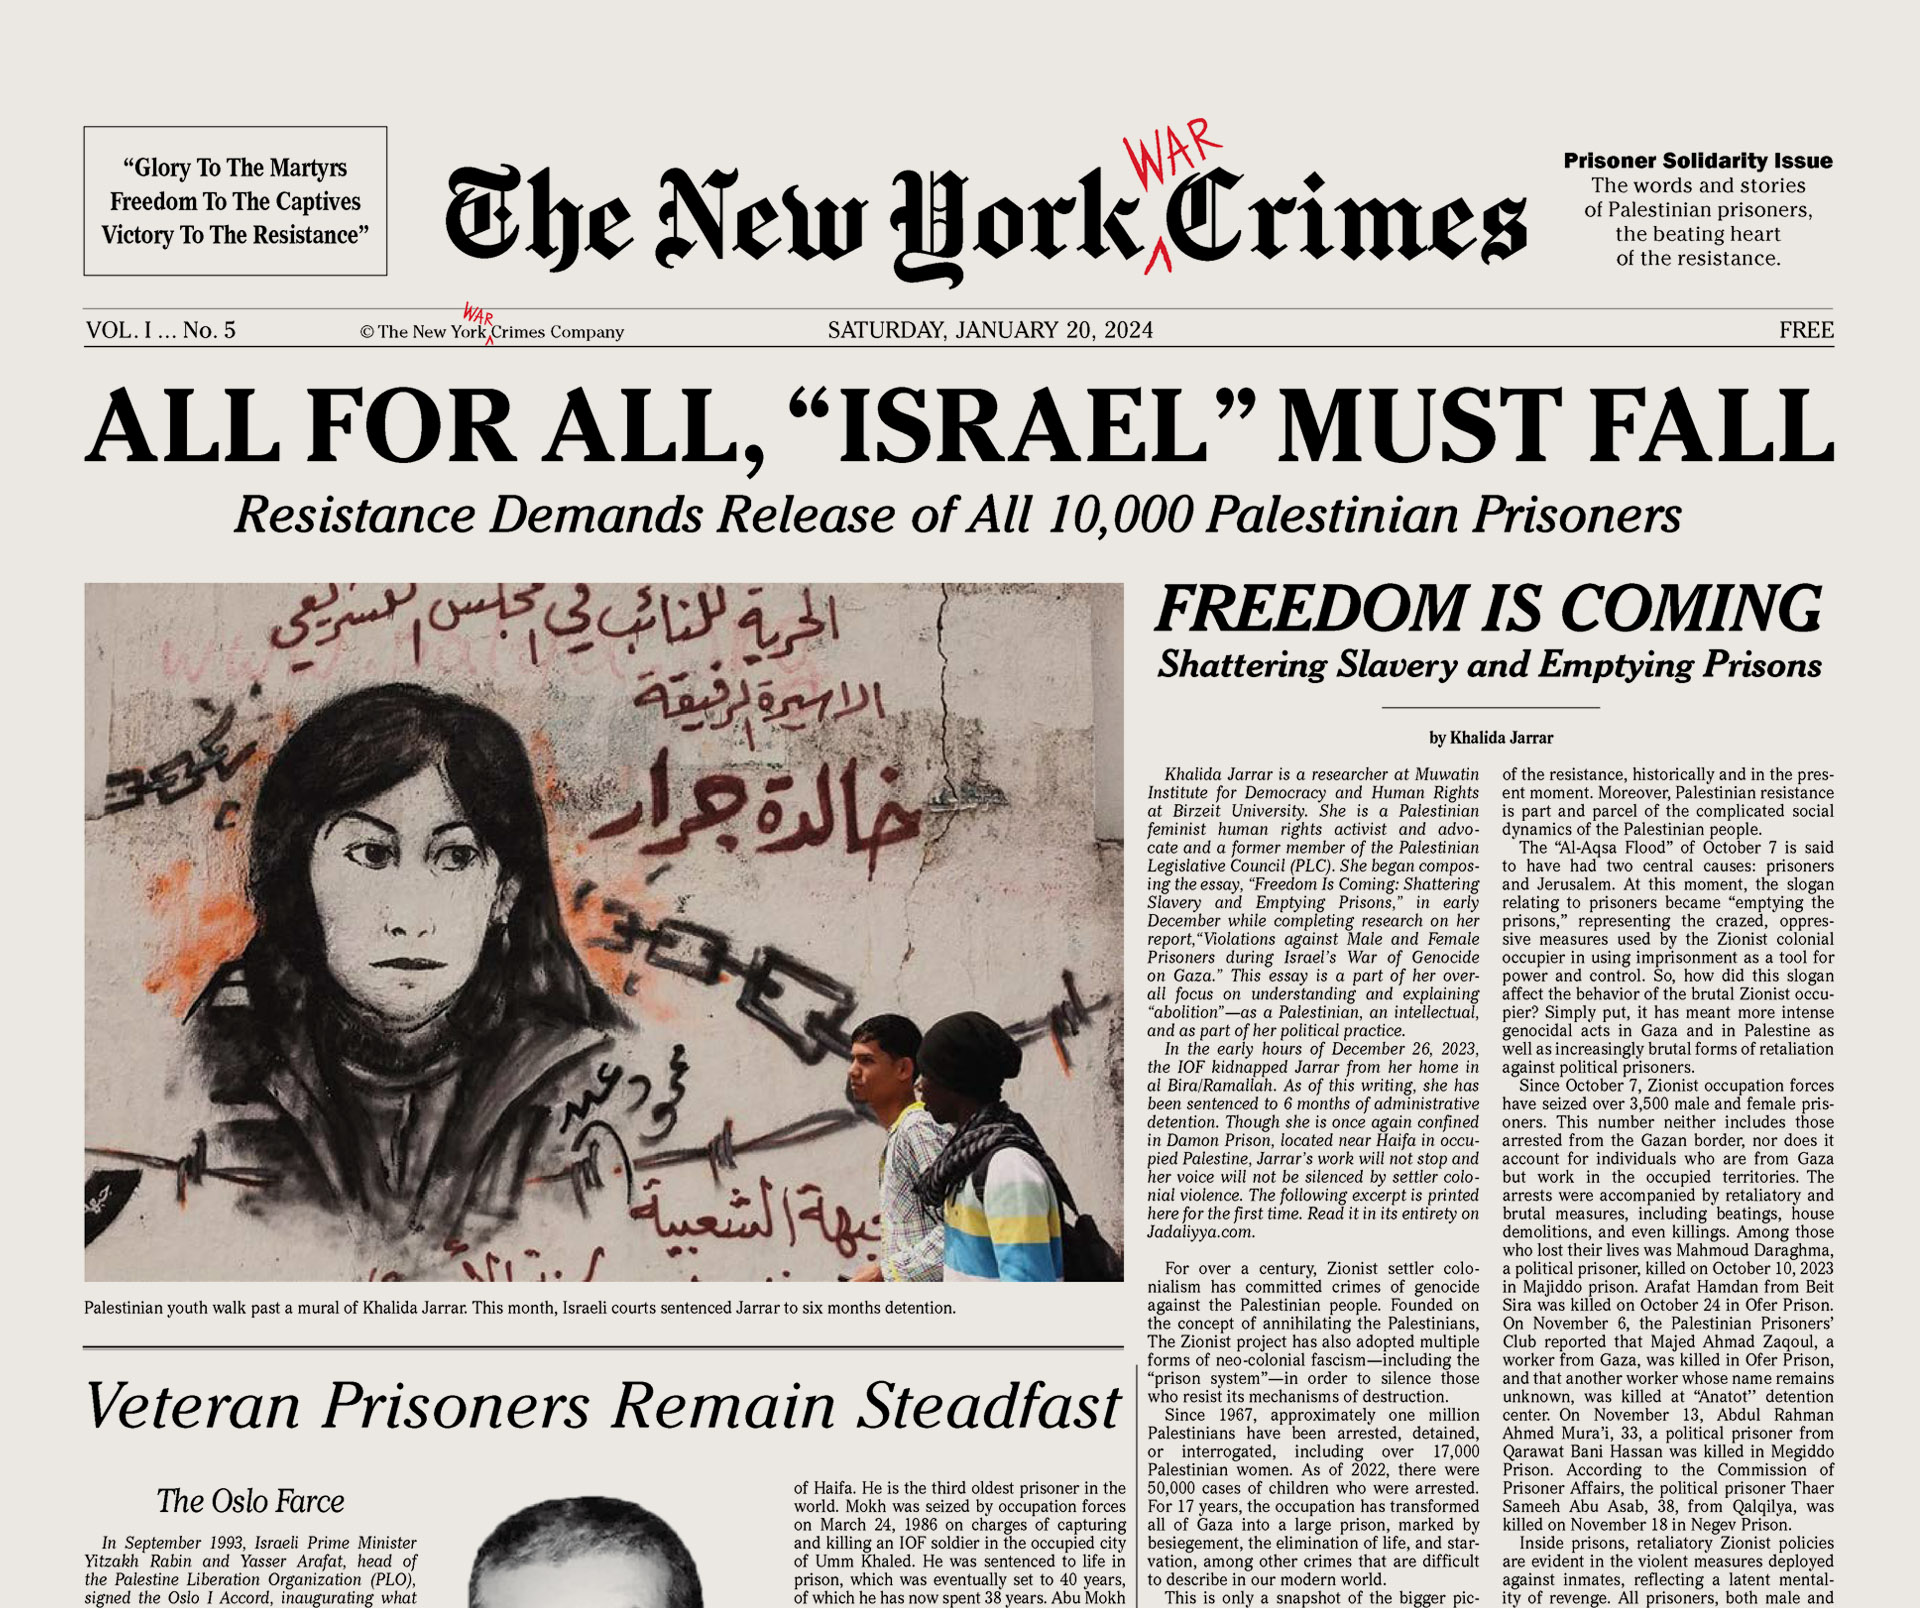 https://newyorkwarcrimes.com/media/pages/print-issue-vol-i-no-5-all-for-all-israel-must-fall/bcad5cf3a2-1709308545/ny-crimes-05-cover.jpg